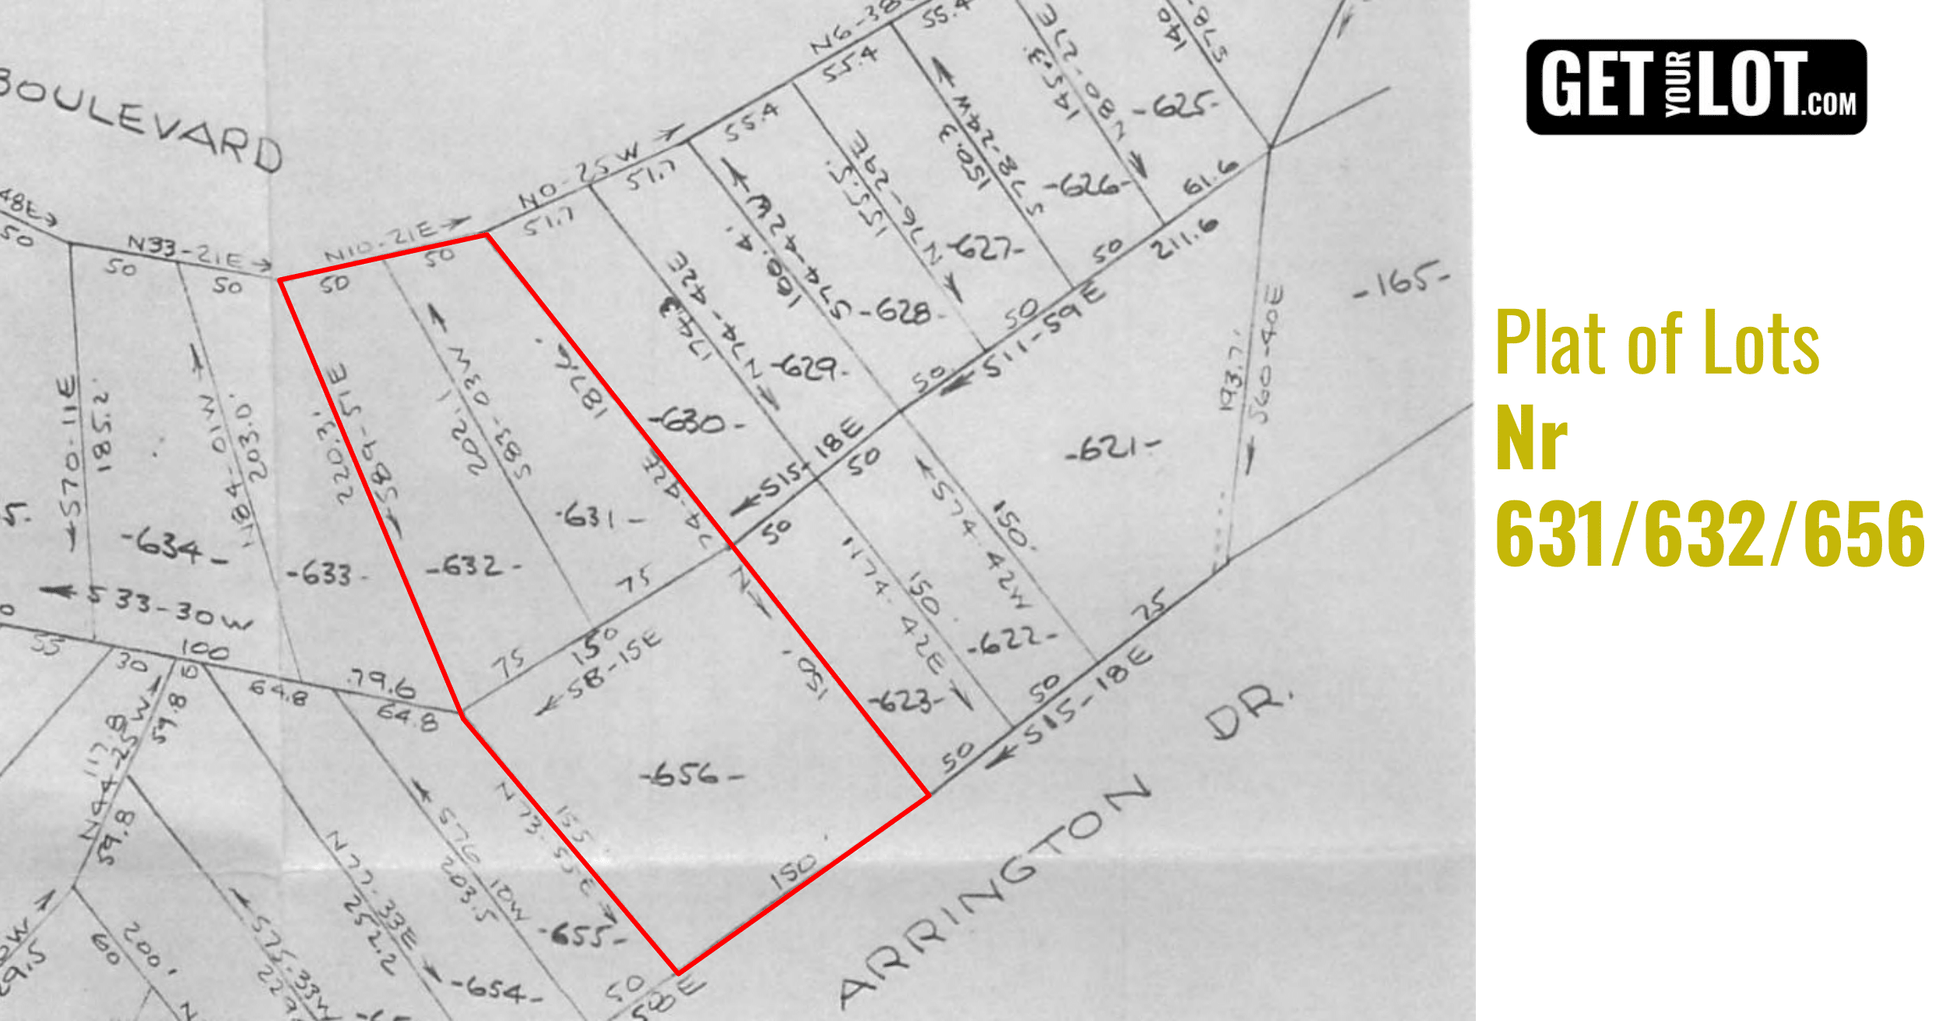 Plat Map of the Property